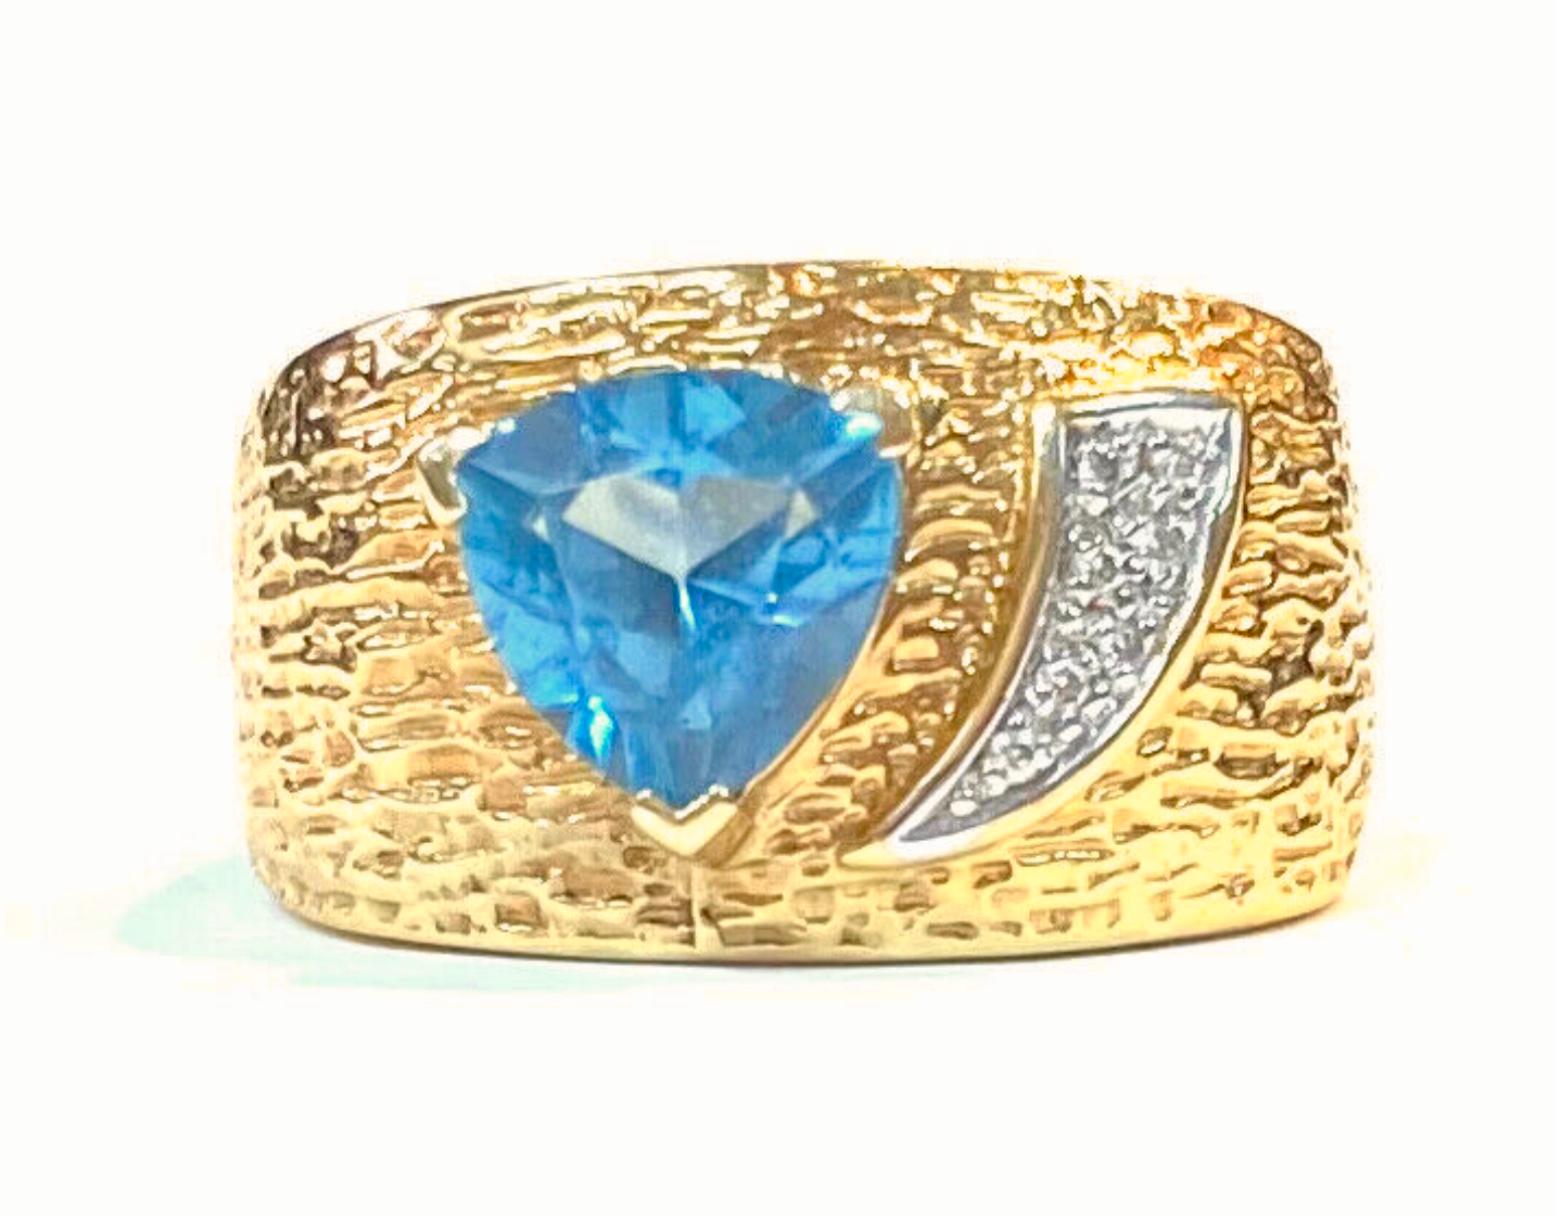 14k yellow gold wide band blue topaz and diamond ring, 11.55 Grams TW. The dimensions of the Trillion Blue Topaz are approximately 7 mm x 7 mm. Approximately 1.5 carat. Marked 14k. Approximate size 7.